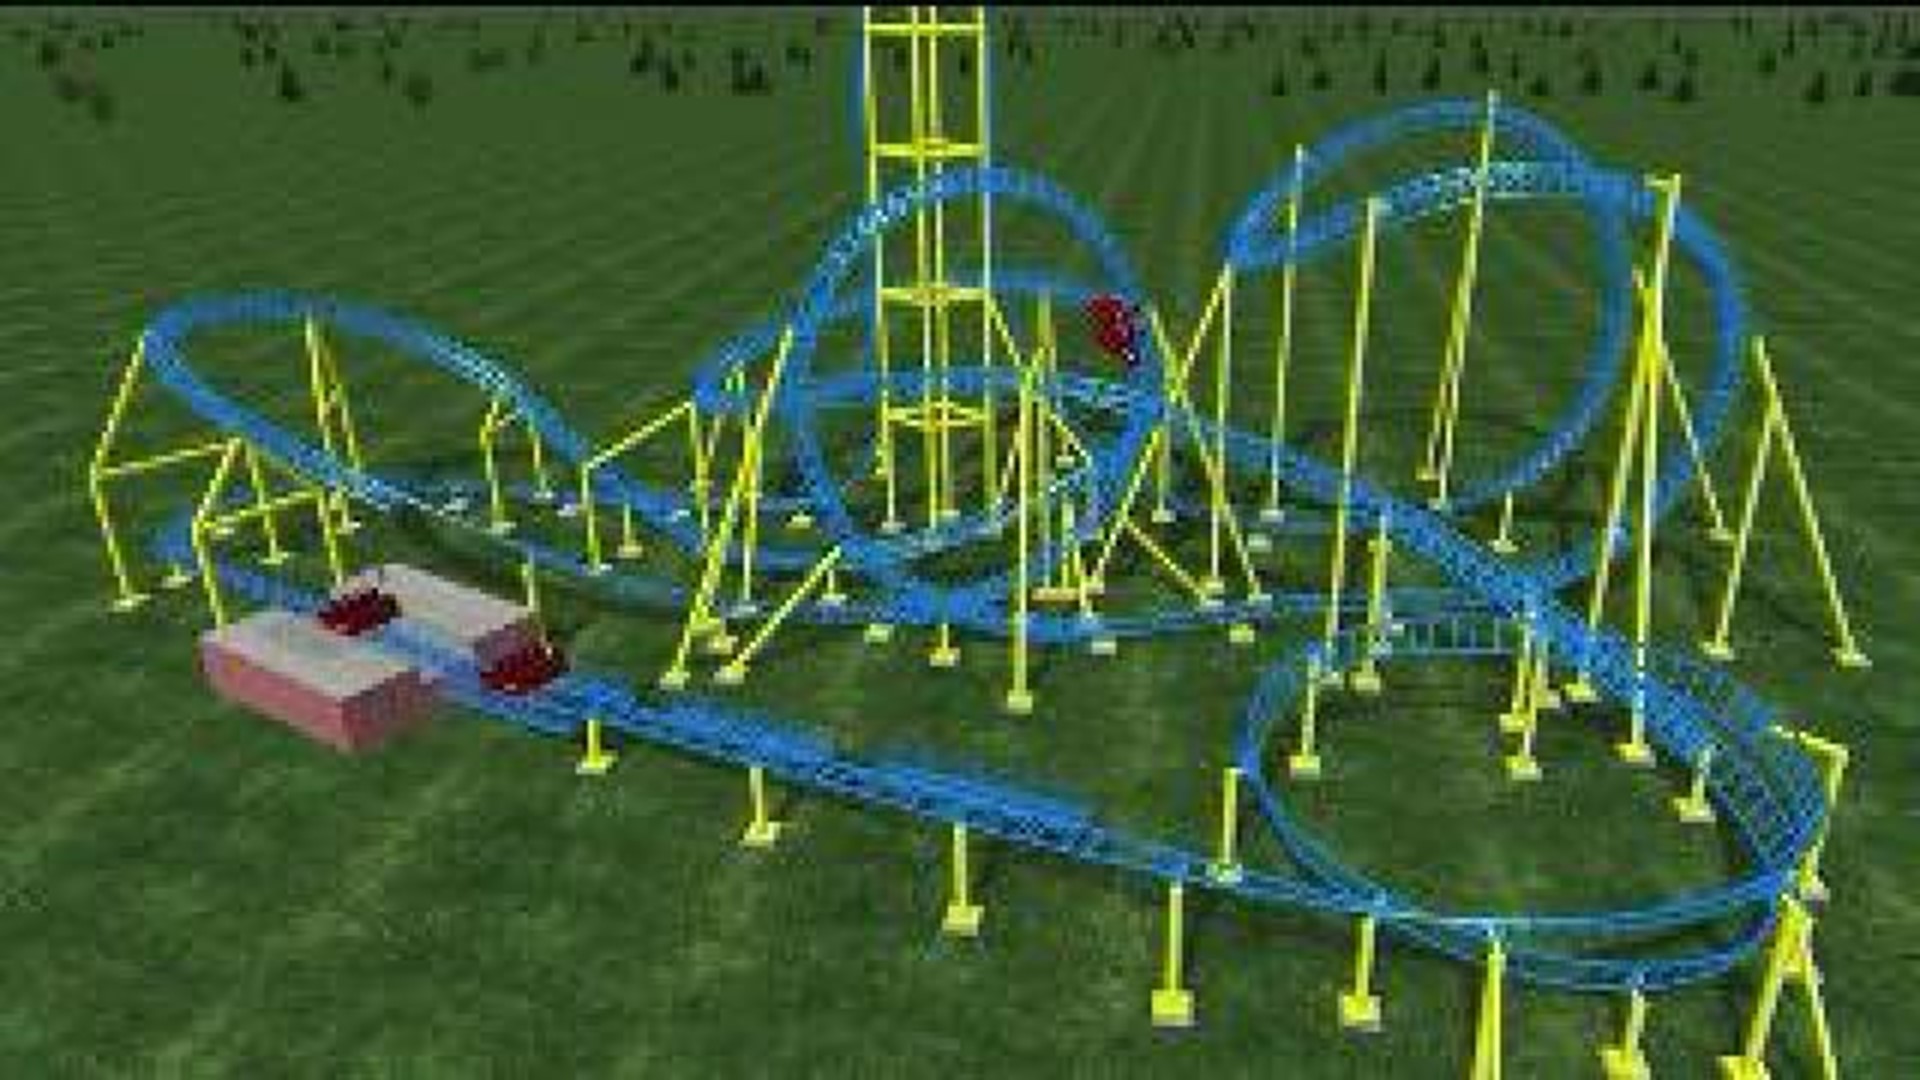 Sky-High Coaster to Cruise Through Knoebels in 2015